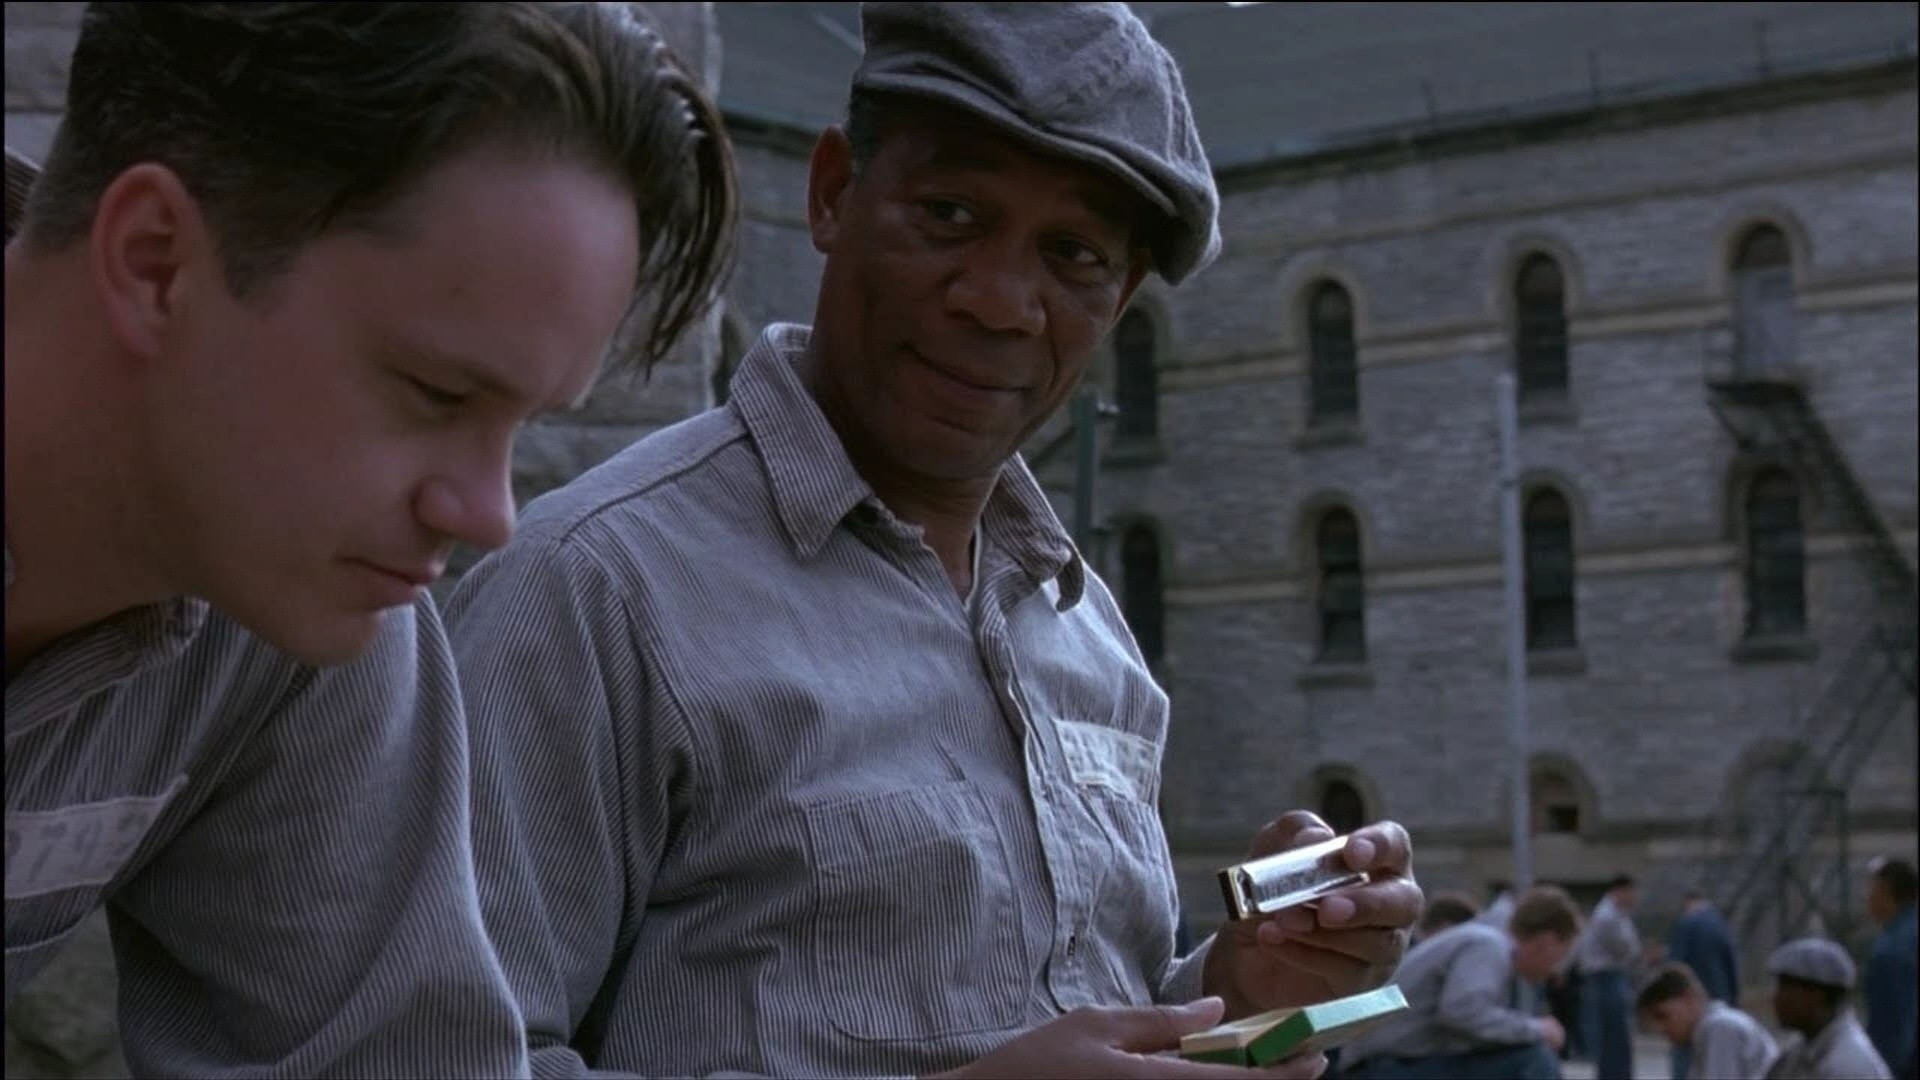 1920x1080 Arguably a modern classic, The Shawshank Redemption is a bold and  accomplished debut film from Frank Darabont, a director who seems to  specialise in prison ...